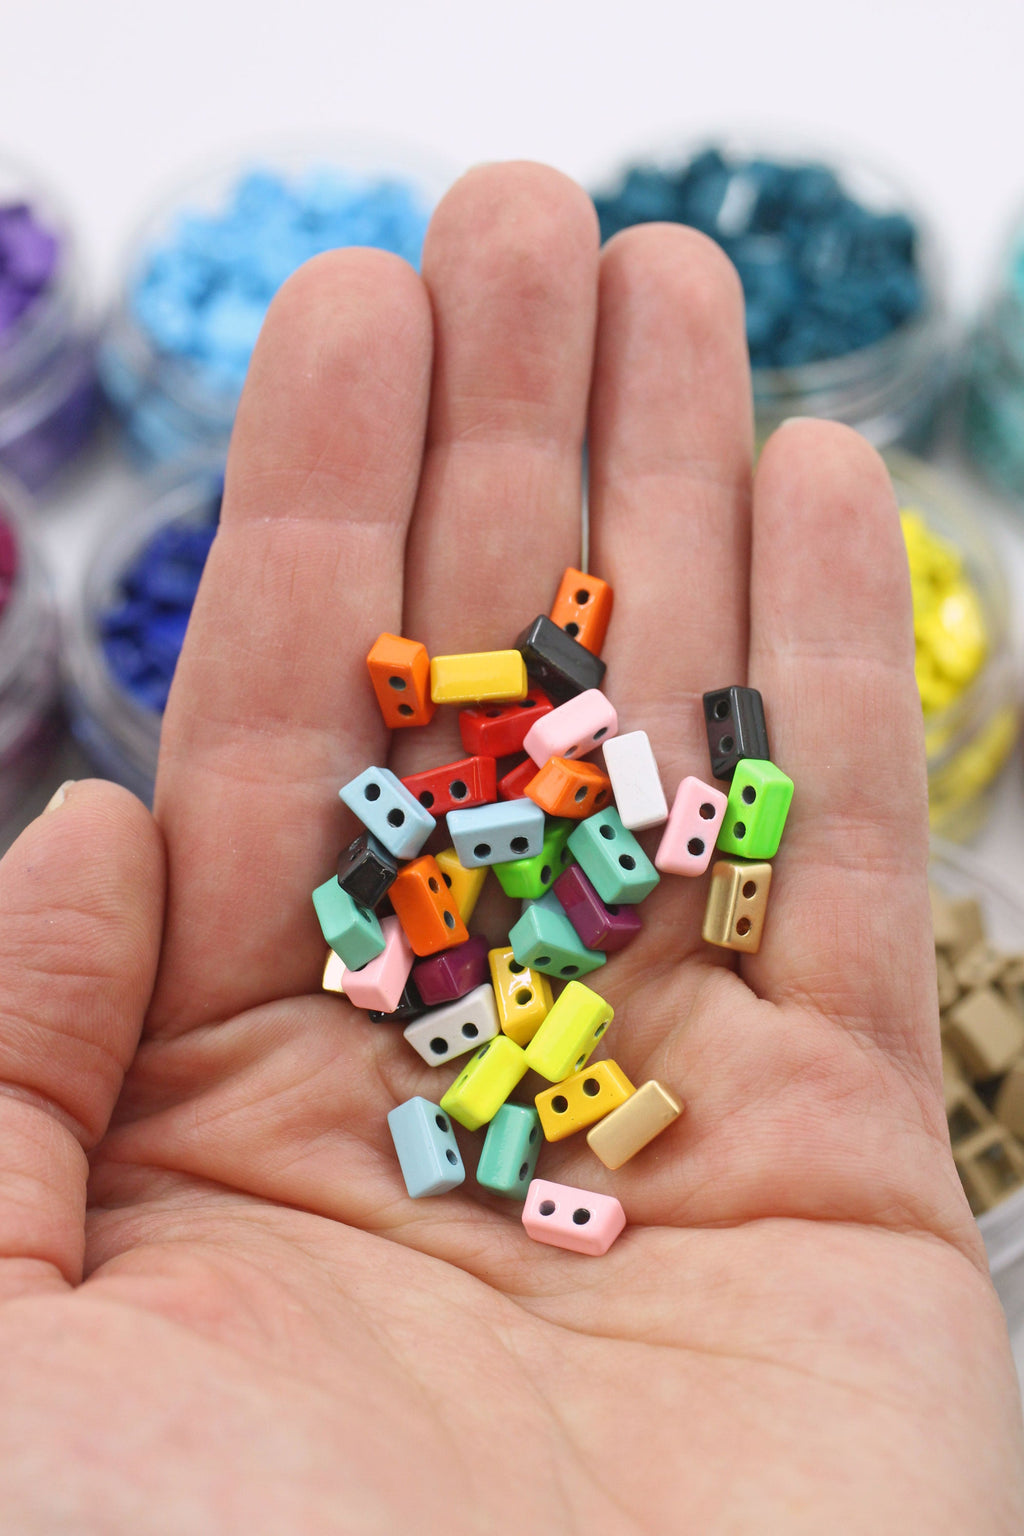 Pack of 10 Assorted European Style Animal Charm Beads.